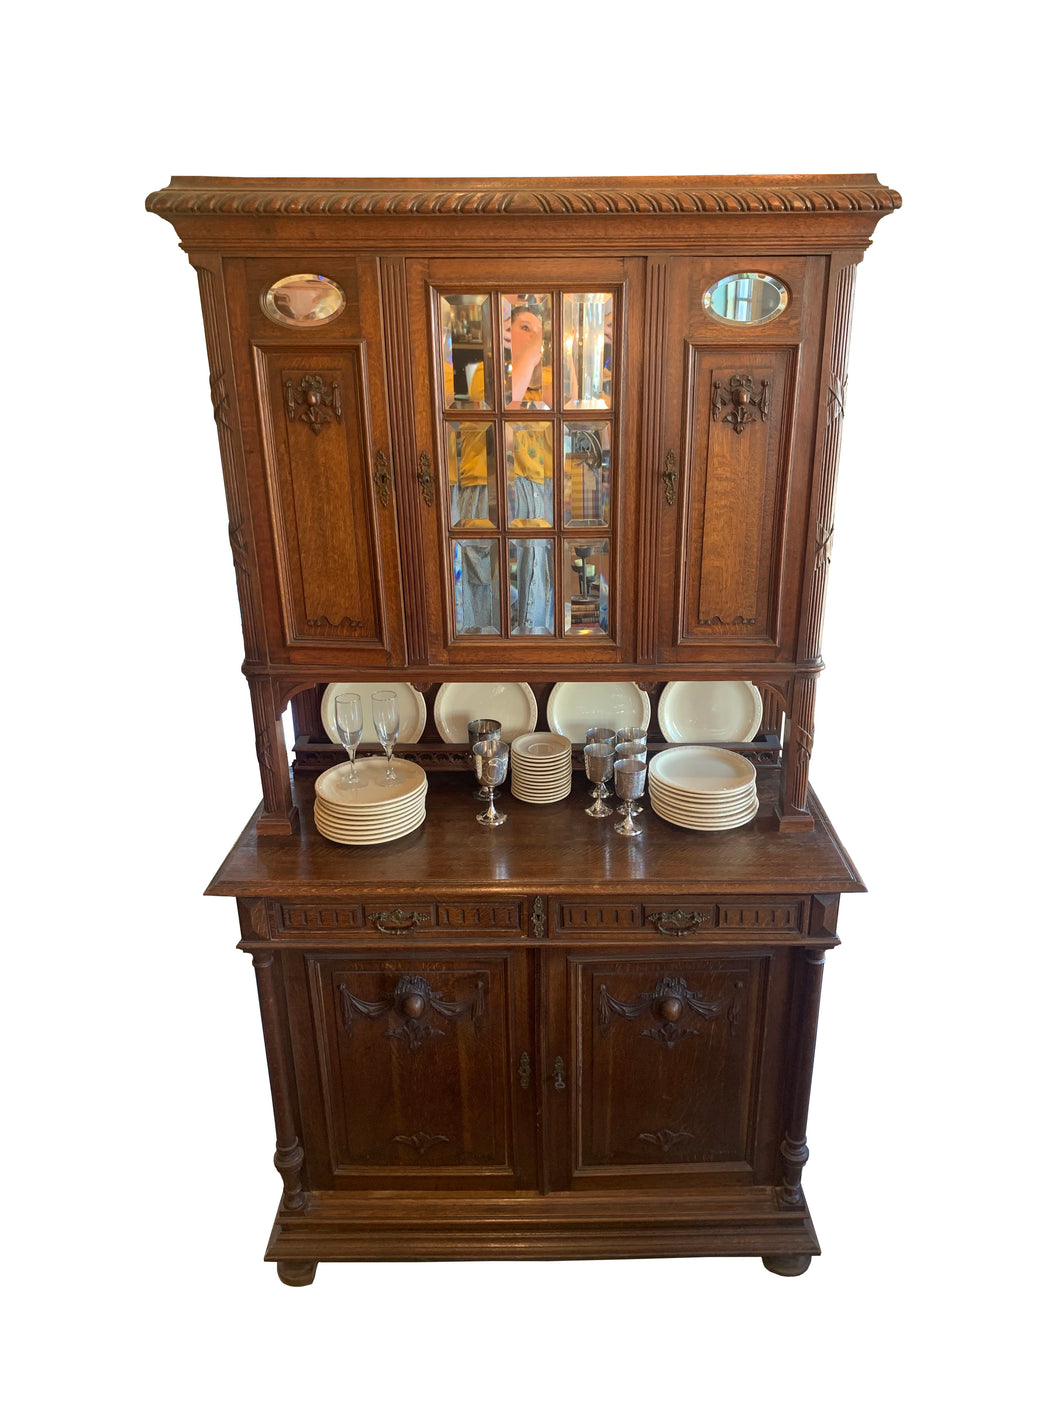 Front of French Cabinet Hutch